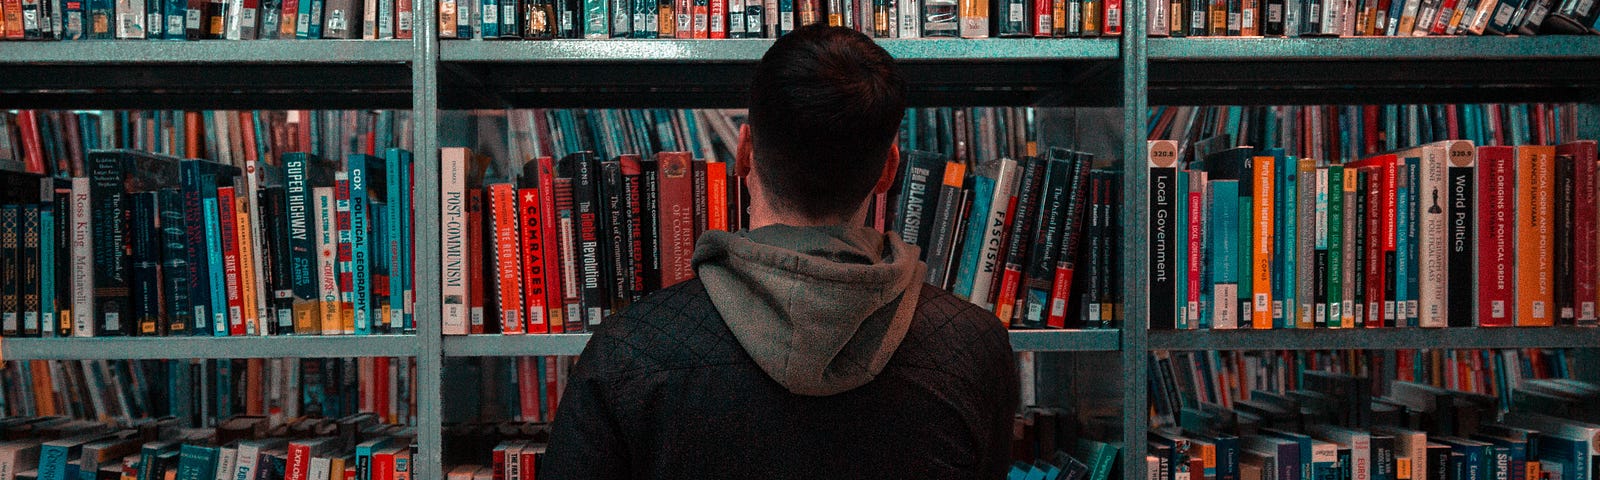 A man looks at a bookcase in a library